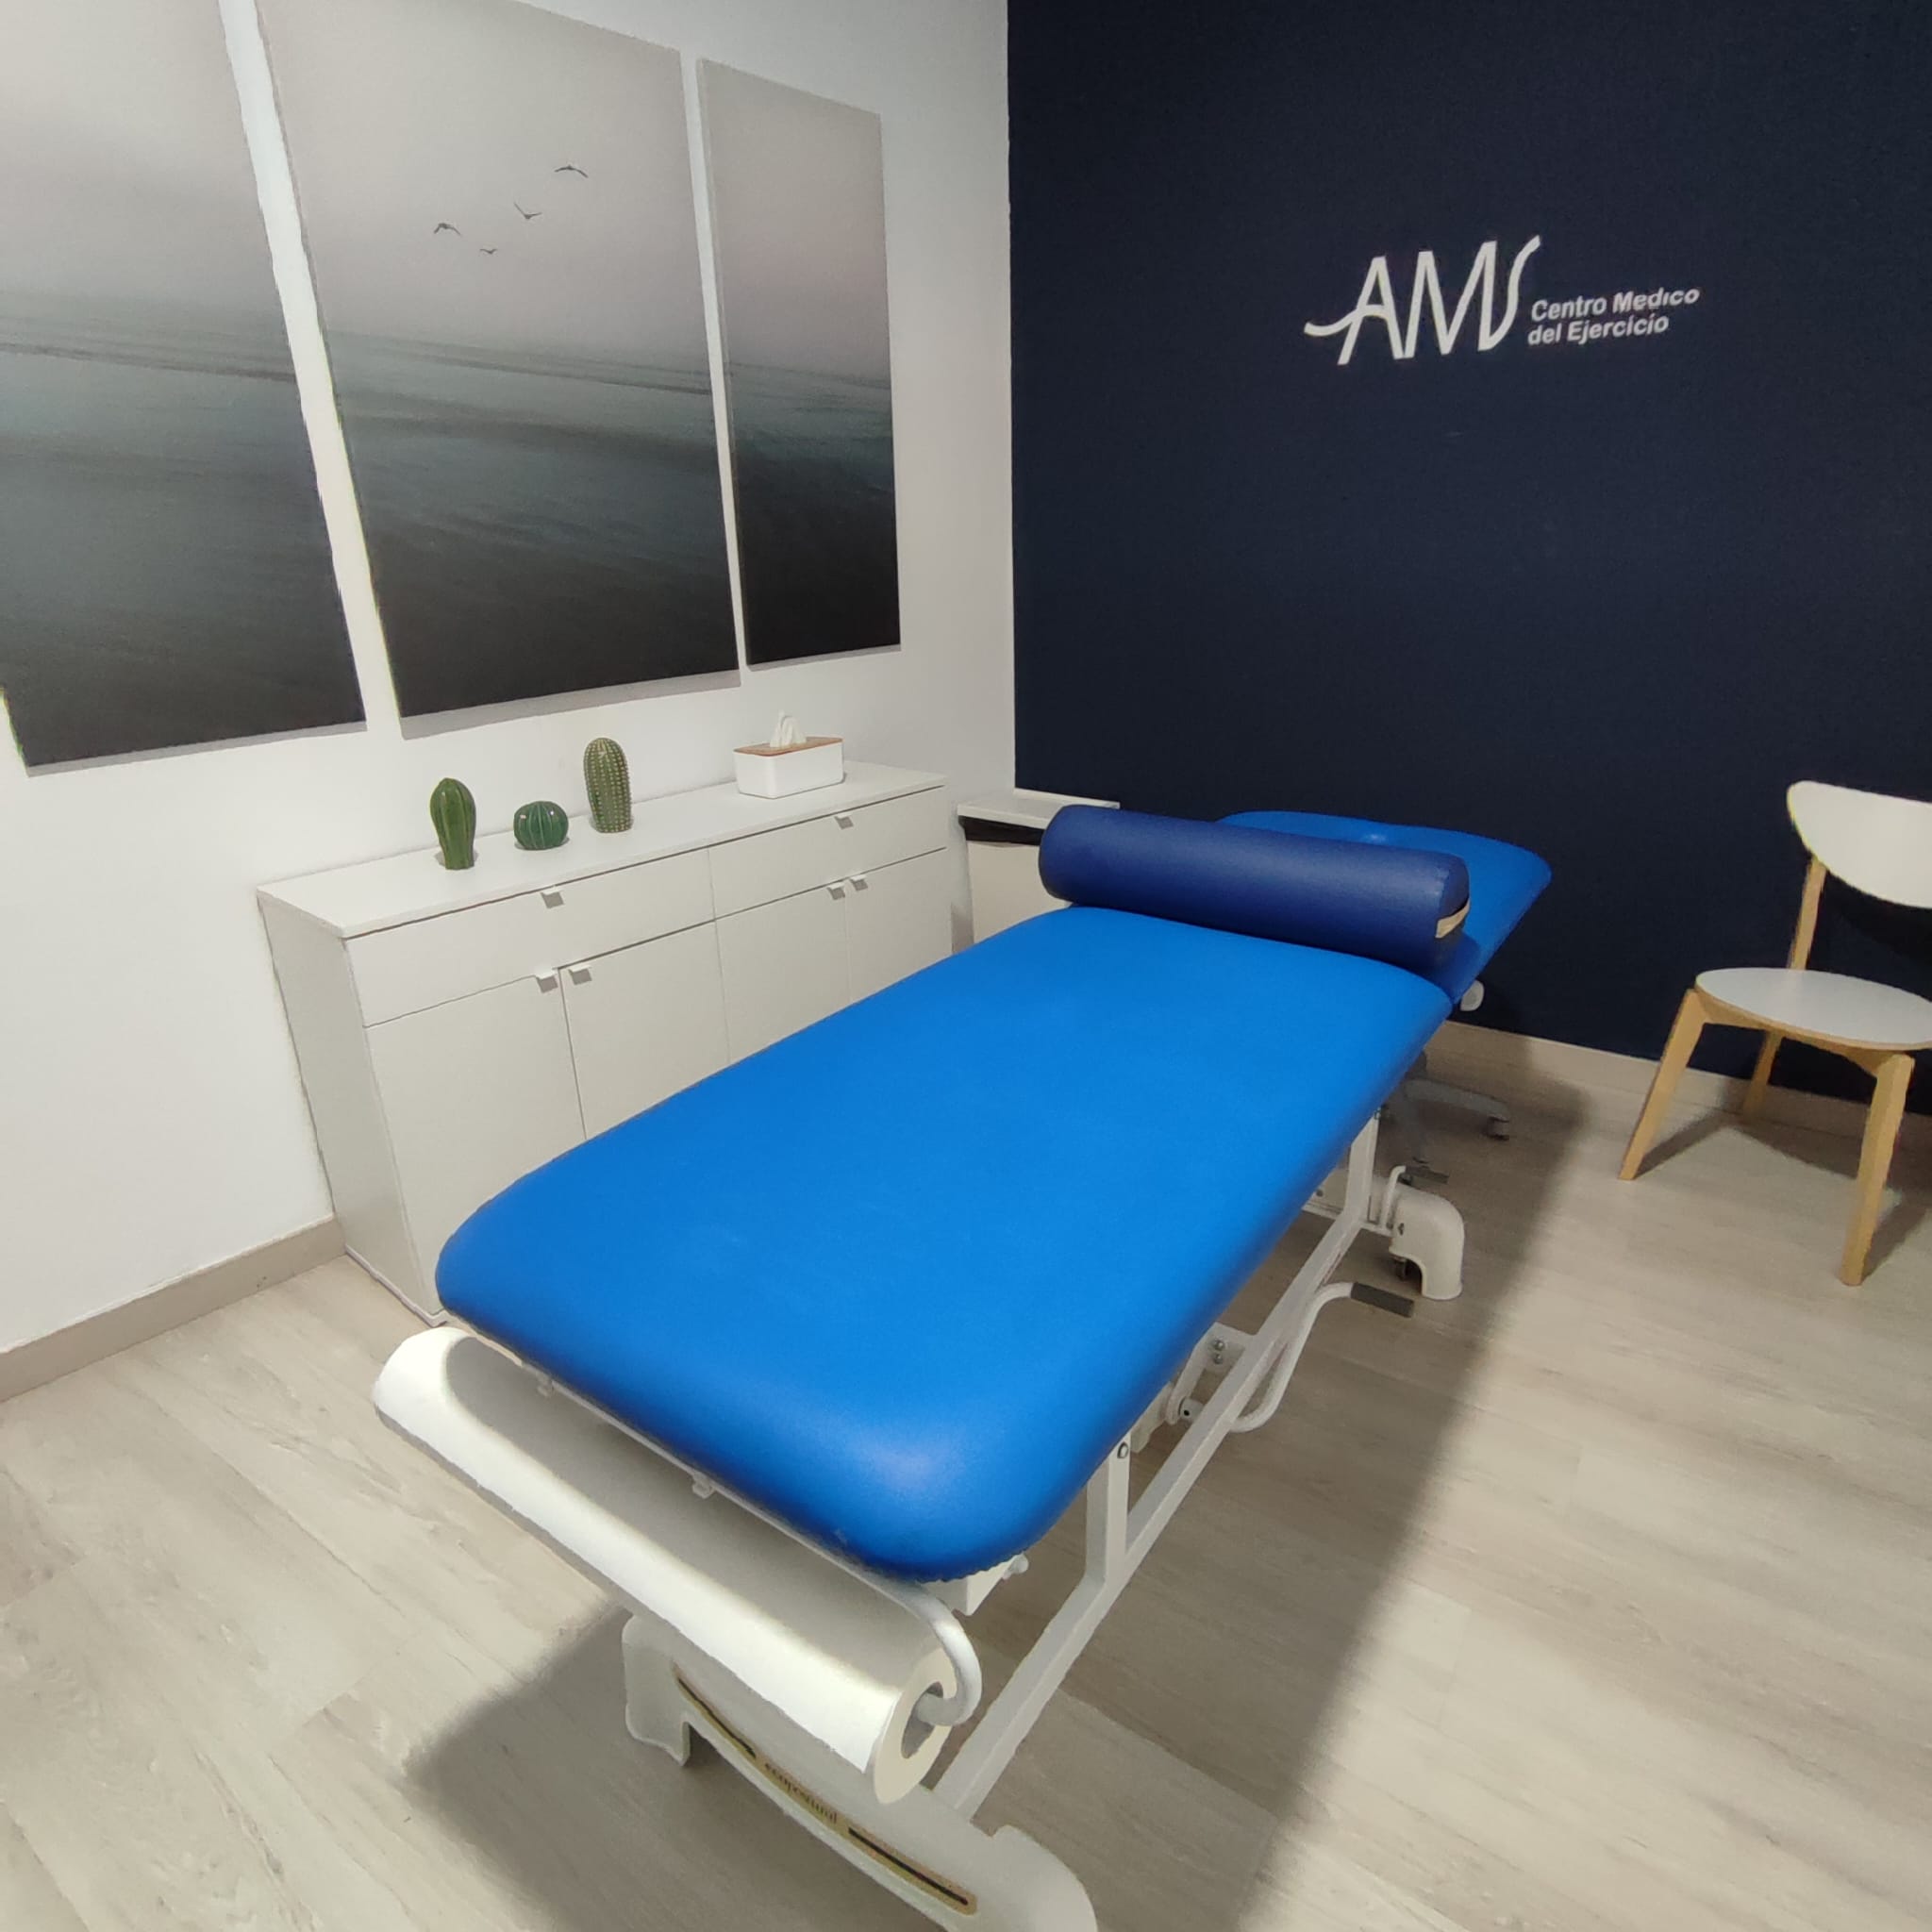 Private physiotherapy room in Marbella at AMS Centro Medico del Ejercicio for individualized treatment of patients.